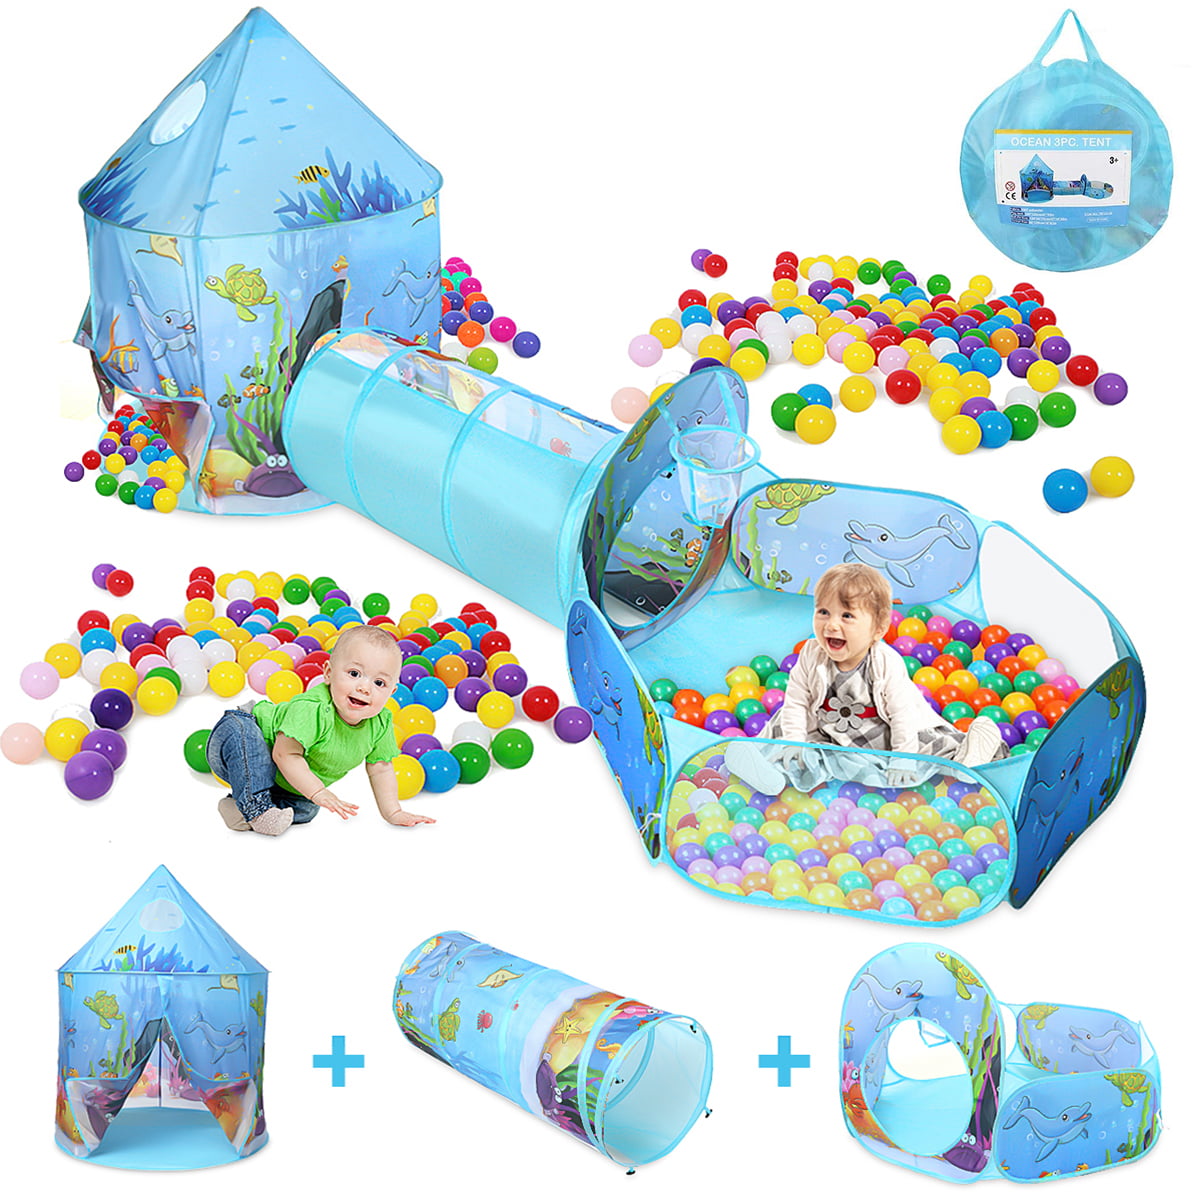 3Pc Kids Play Tent Crawl Tunnel Ball Pit Set Durable Pop Up Playhouse Boys 